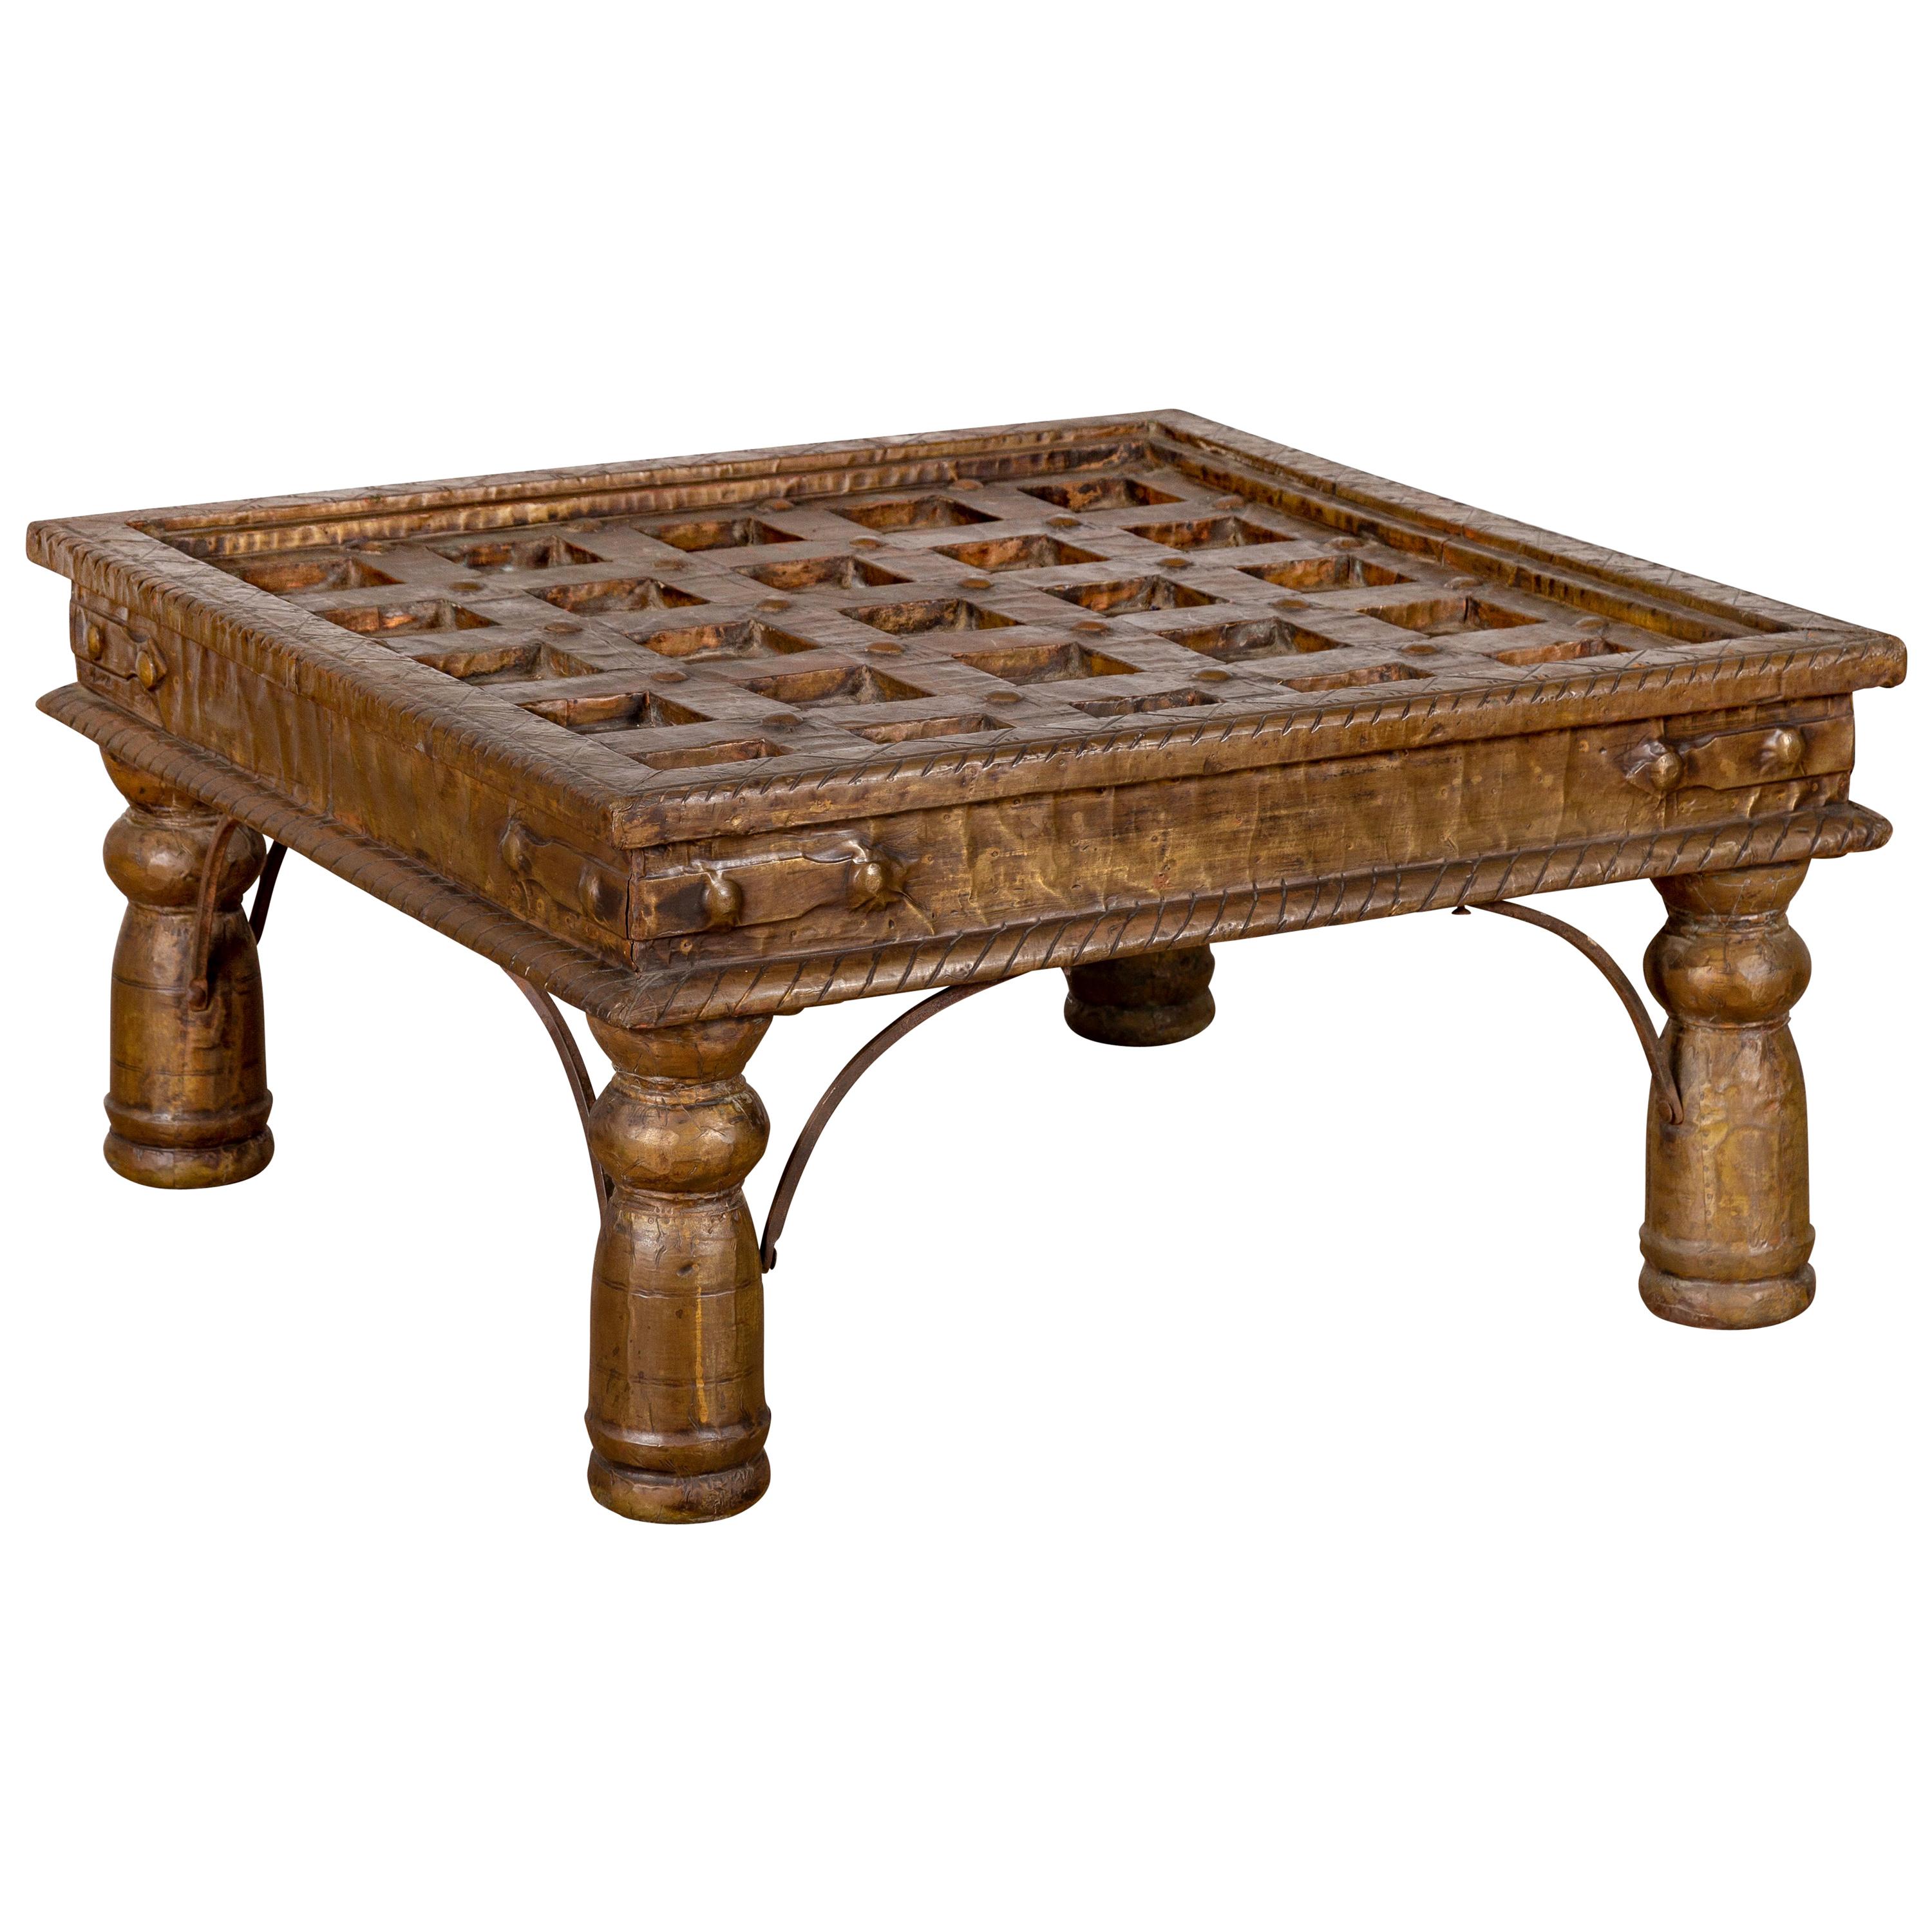 Indian Geometric Top Wood and Brass Window Grate Made into a Coffee Table